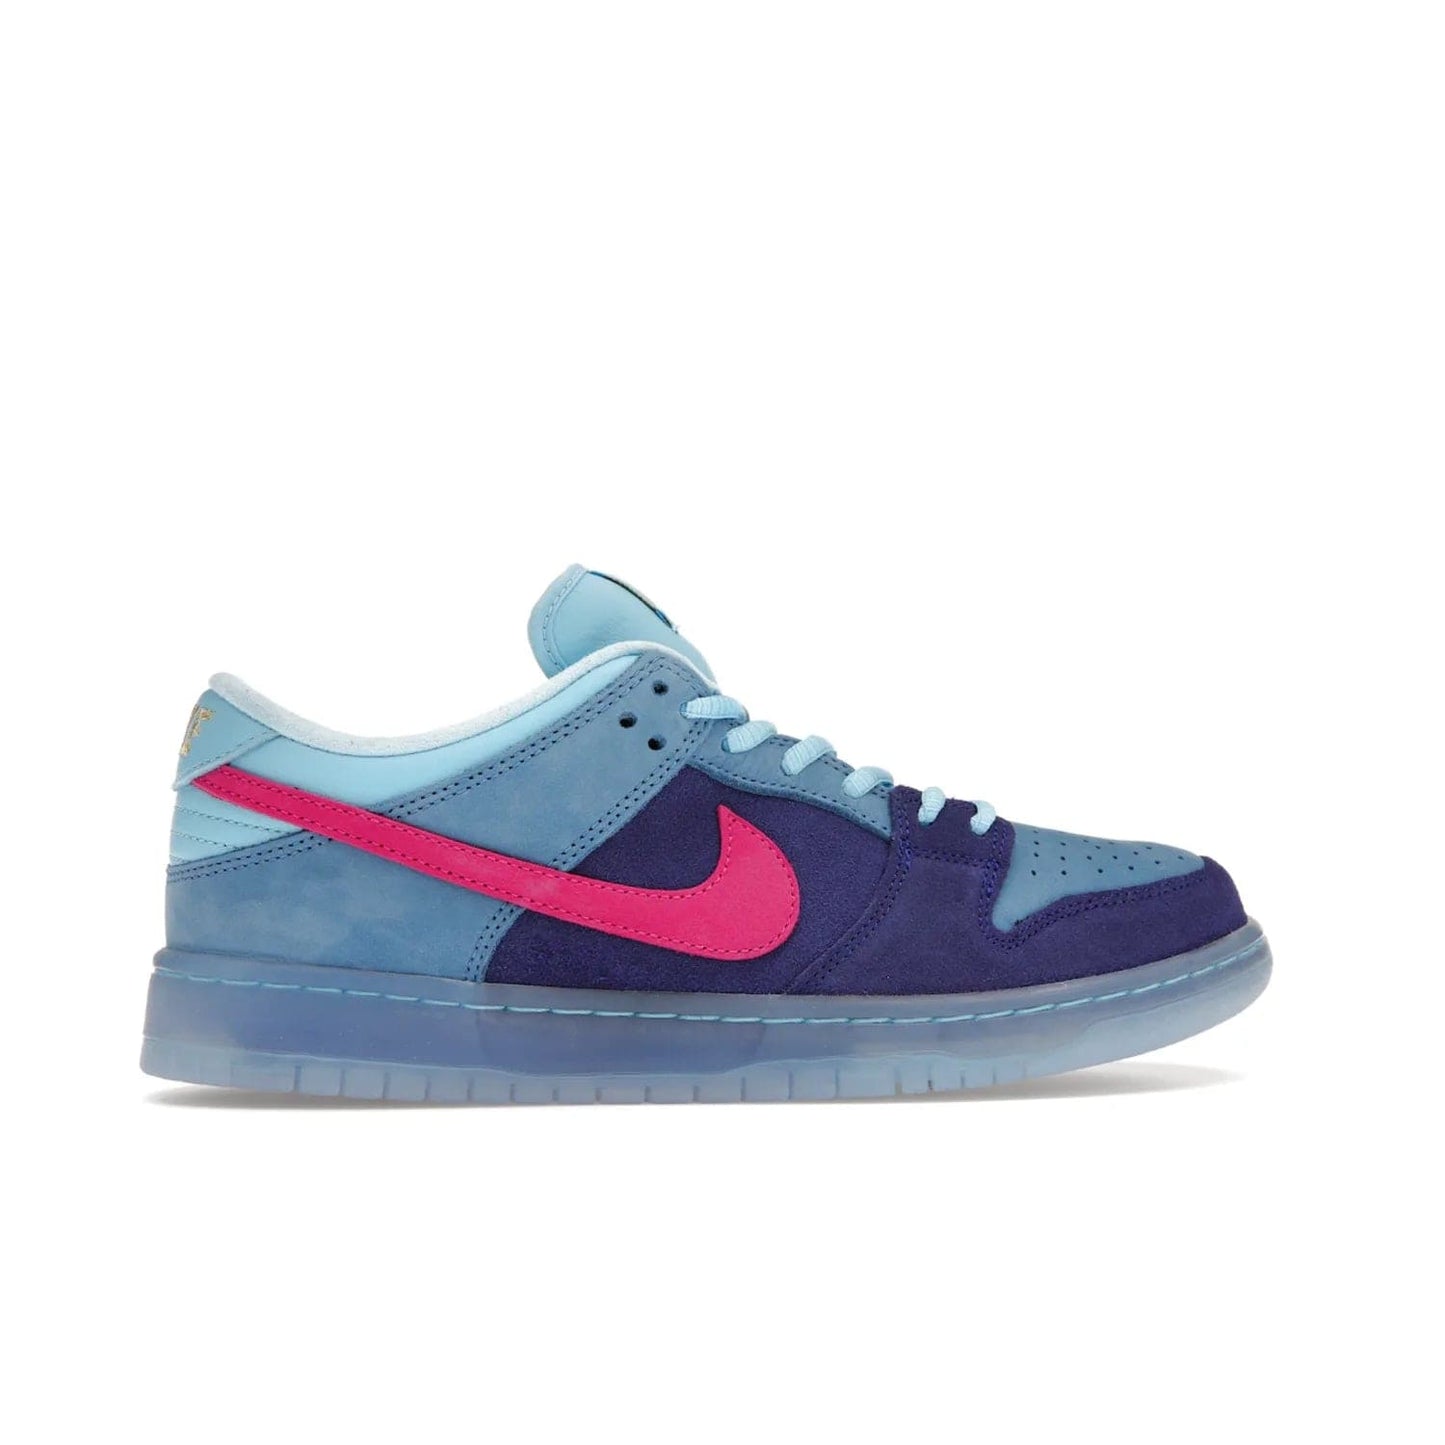 Nike SB Dunk Low Run The Jewels - Image 36 - Only at www.BallersClubKickz.com - The Nike SB Dunk Low Run The Jewels pays tribute to the Run the Jewels 3 album cover. It features a blue suede upper with pink suede accents, gold branding and 3 lace sets. RTJ insoles complete this limited edition sneaker. Get it now for your shoe collection.